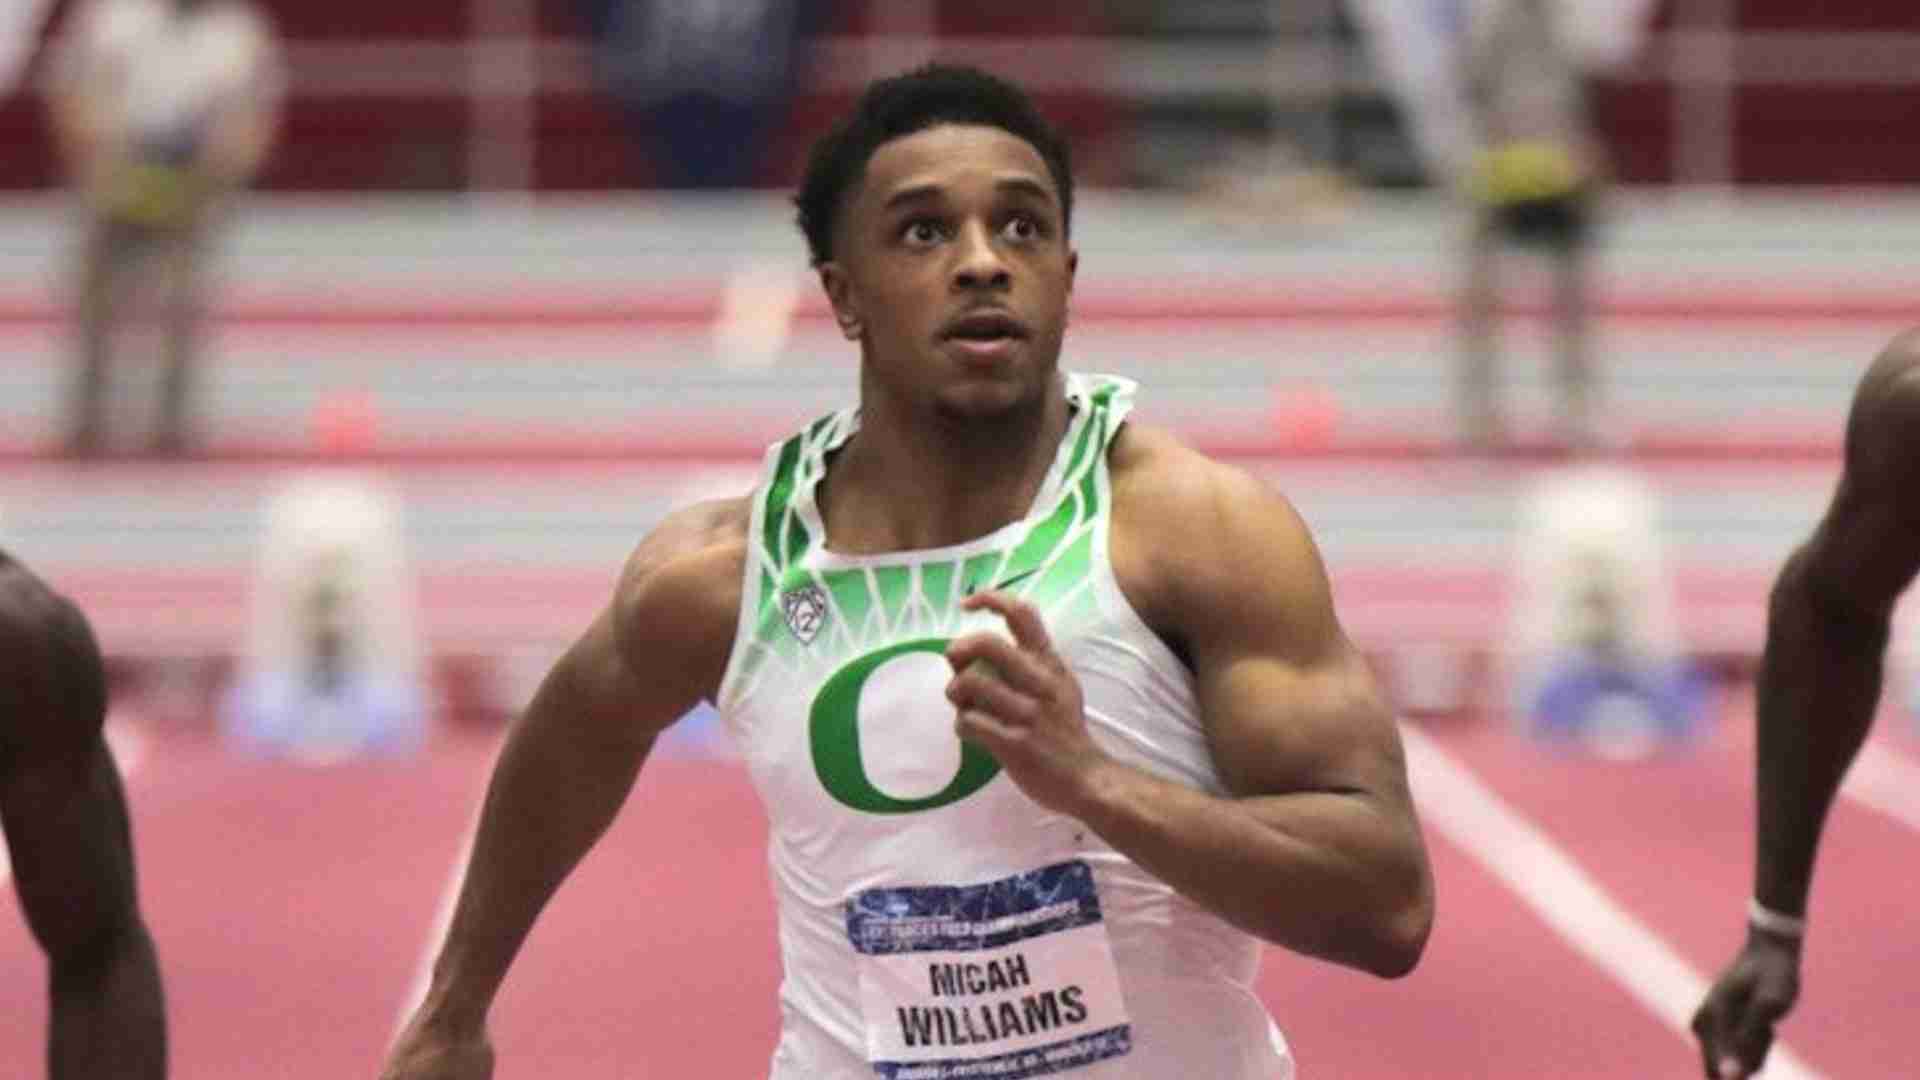 [Watch video] Oregon Micah Williams wins 60m with 6.48 at Cougar Classic Invitational